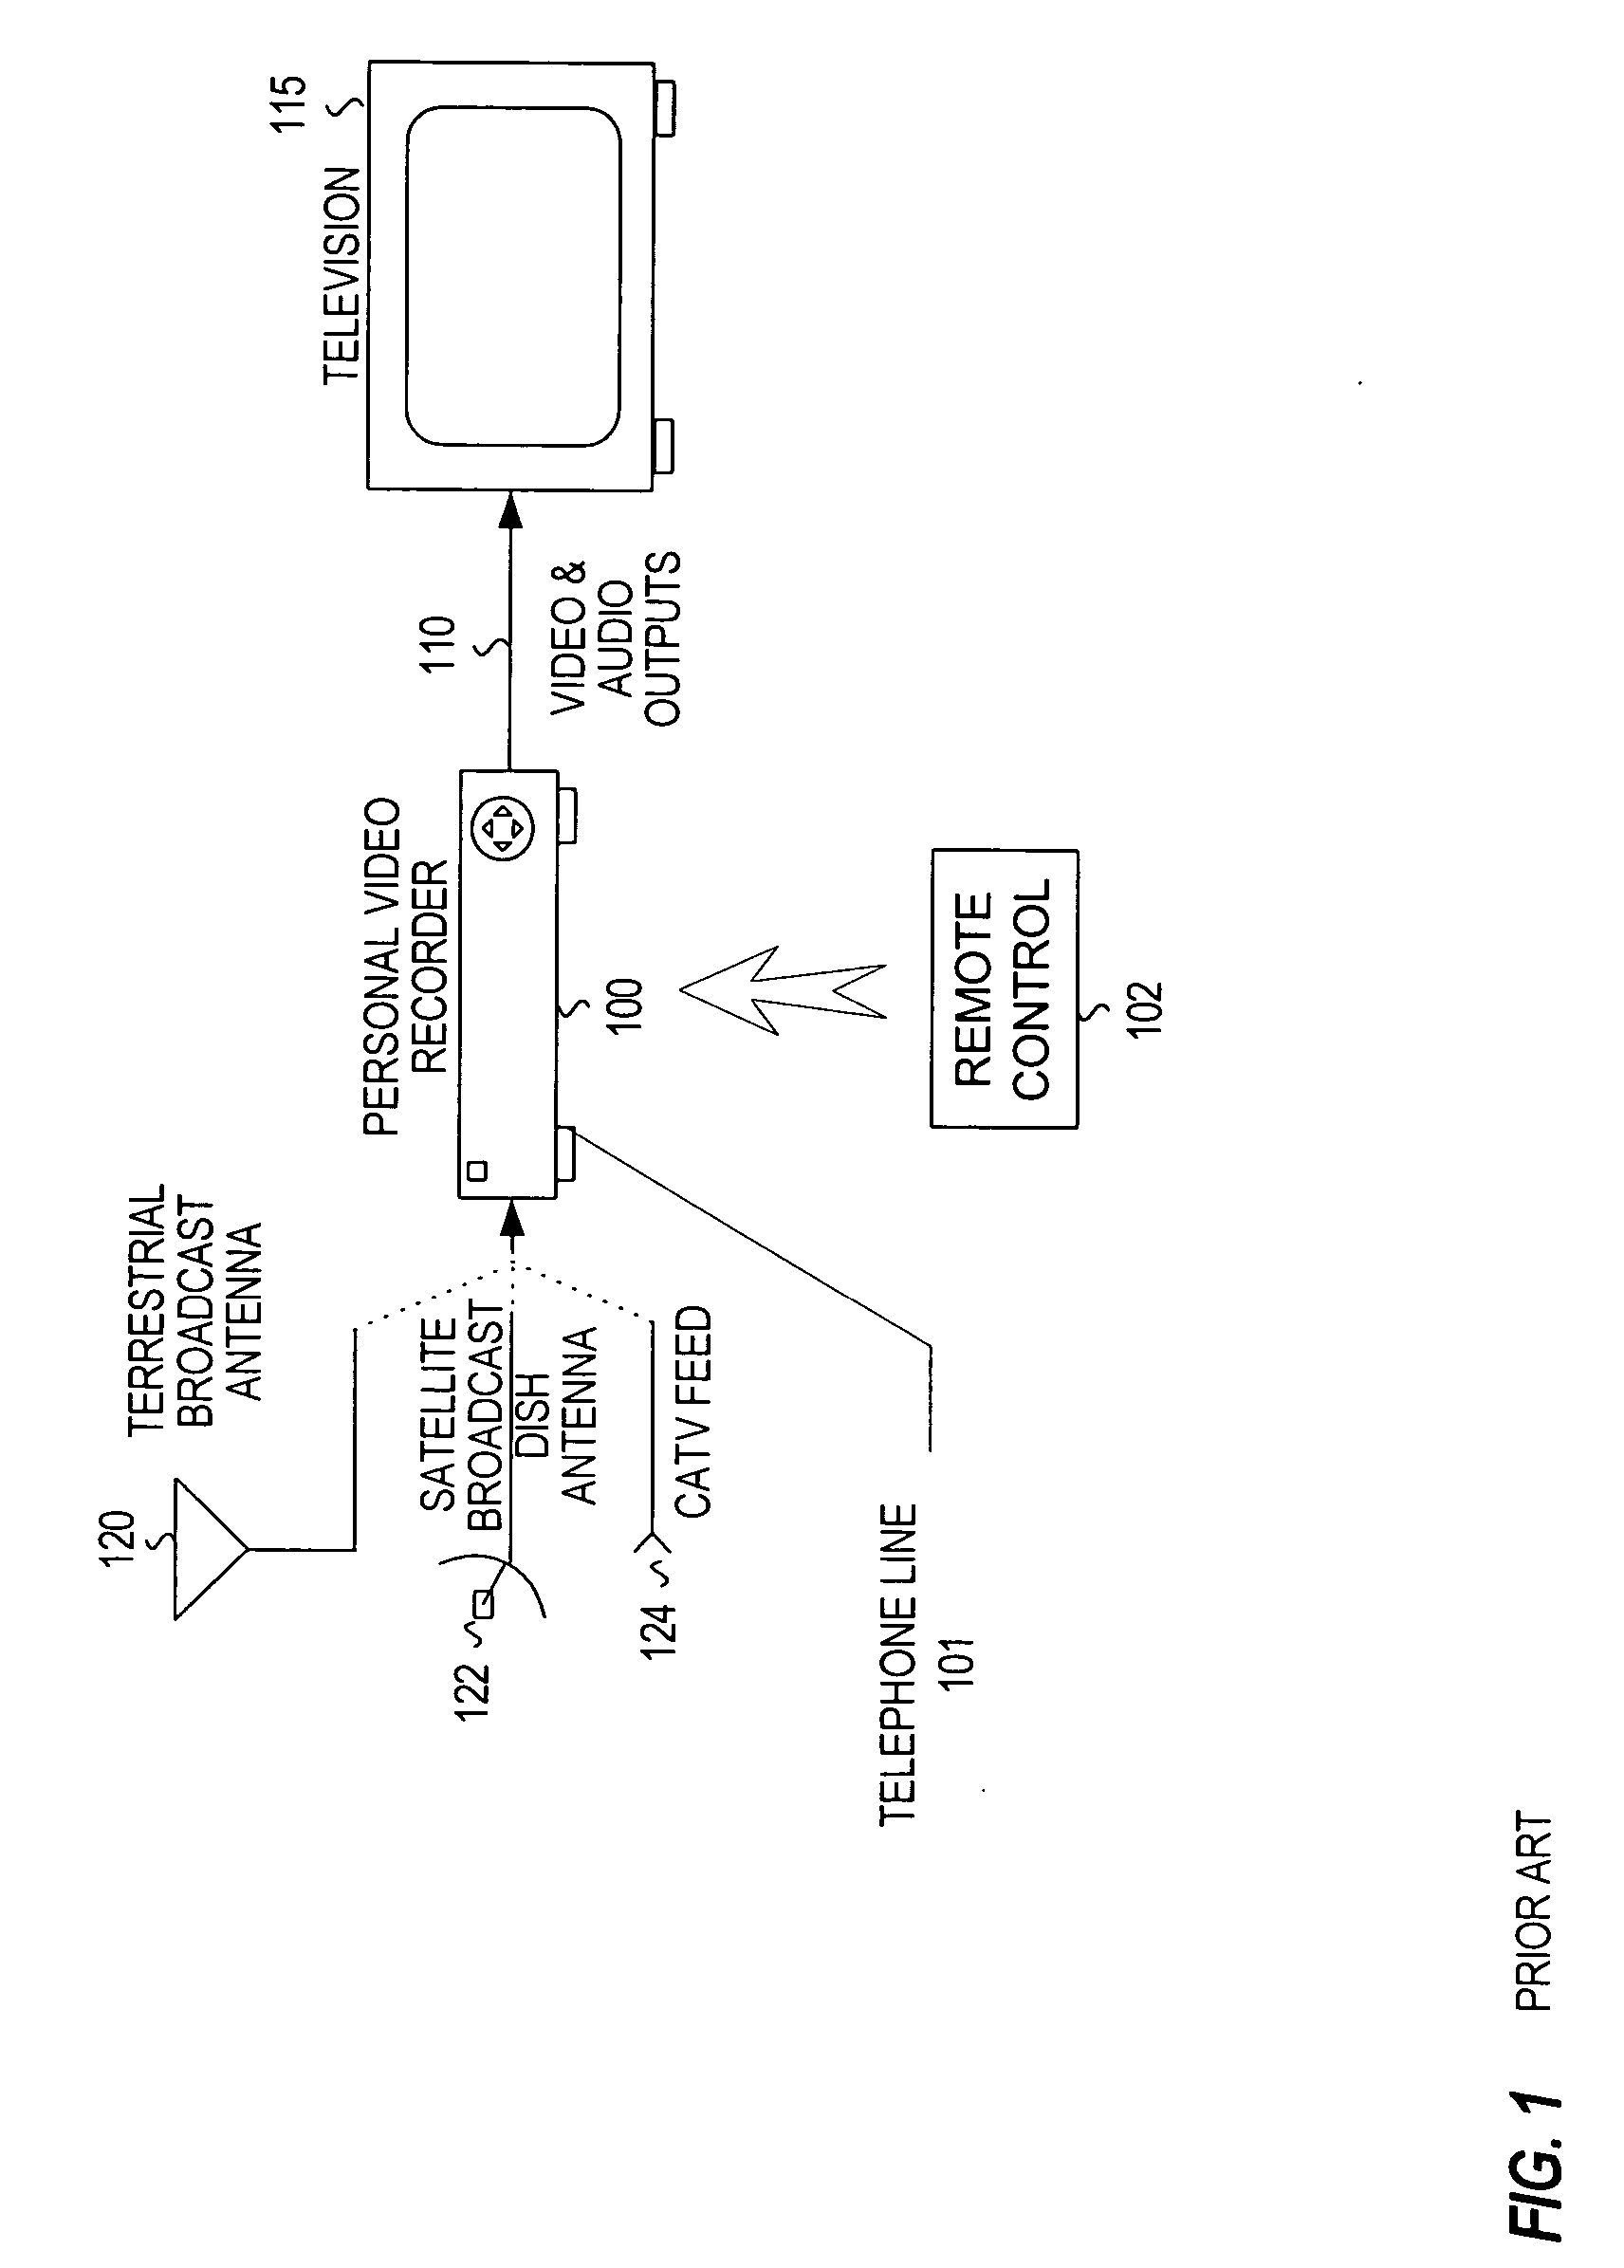 Method and apparatus for exchanging preferences for replaying a program on a personal video recorder